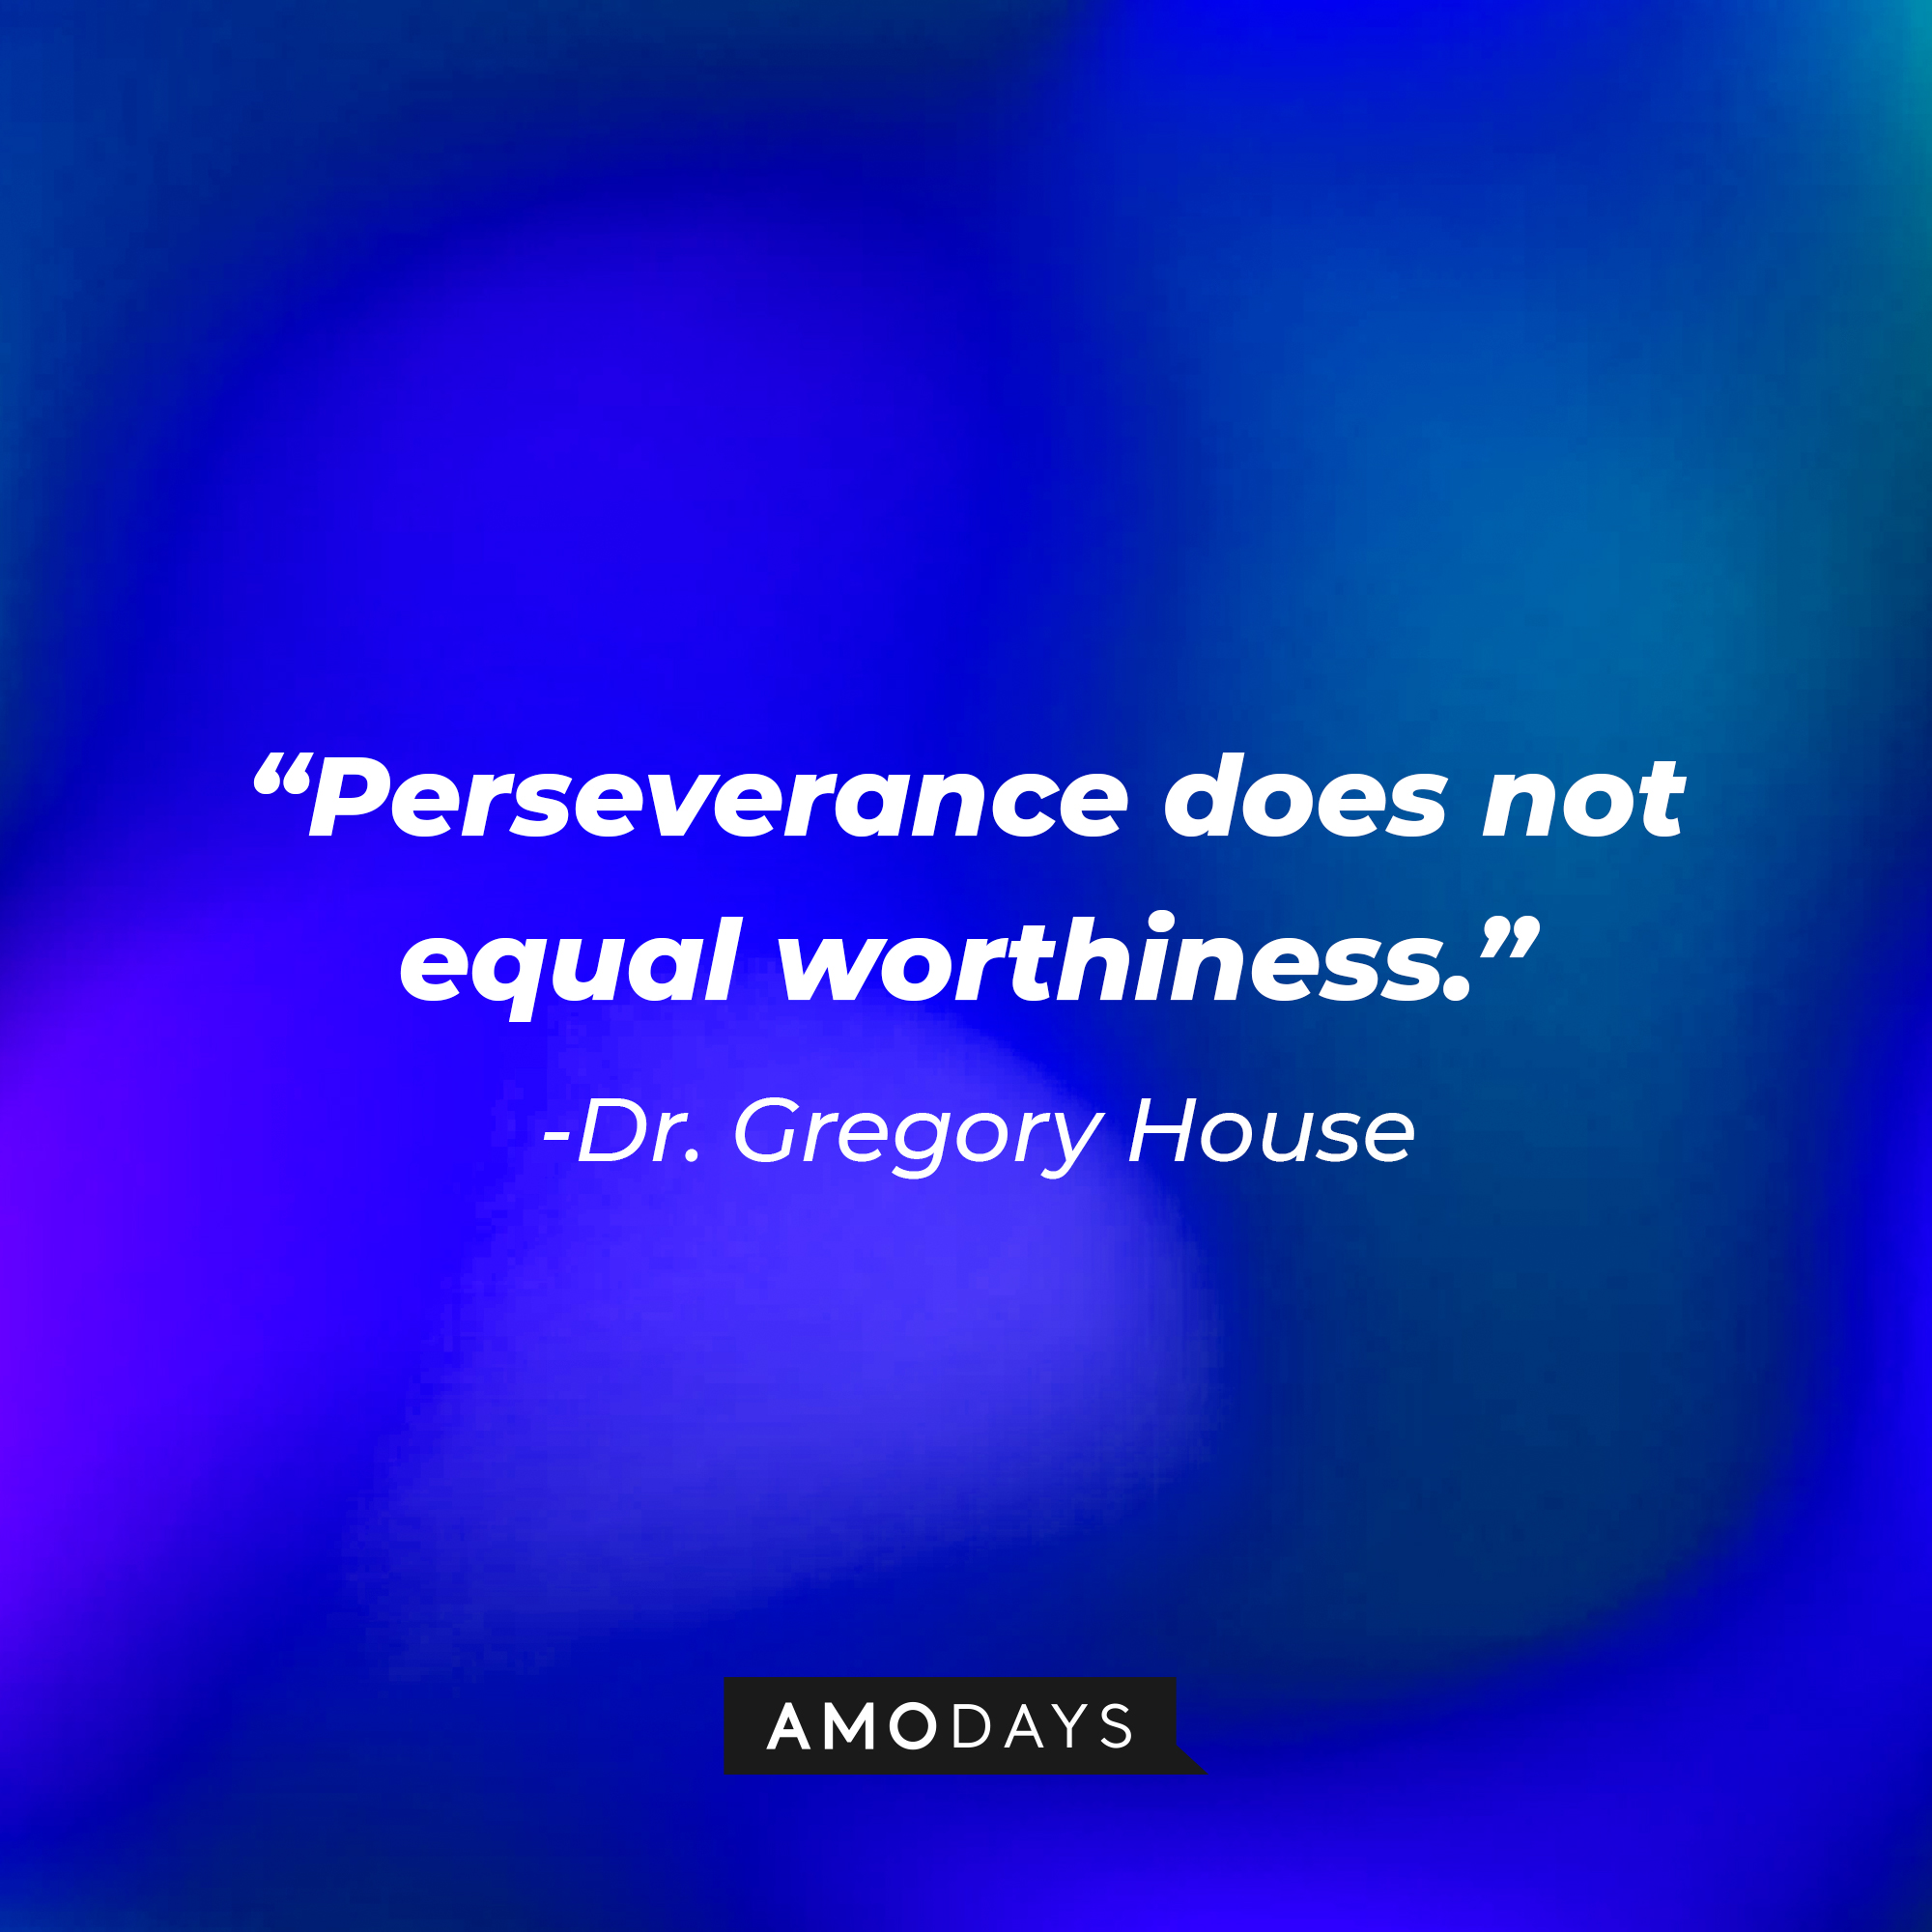 Dr. Gregory House’s quote: “Perseverance does not equal worthiness." | Source: AmoDays